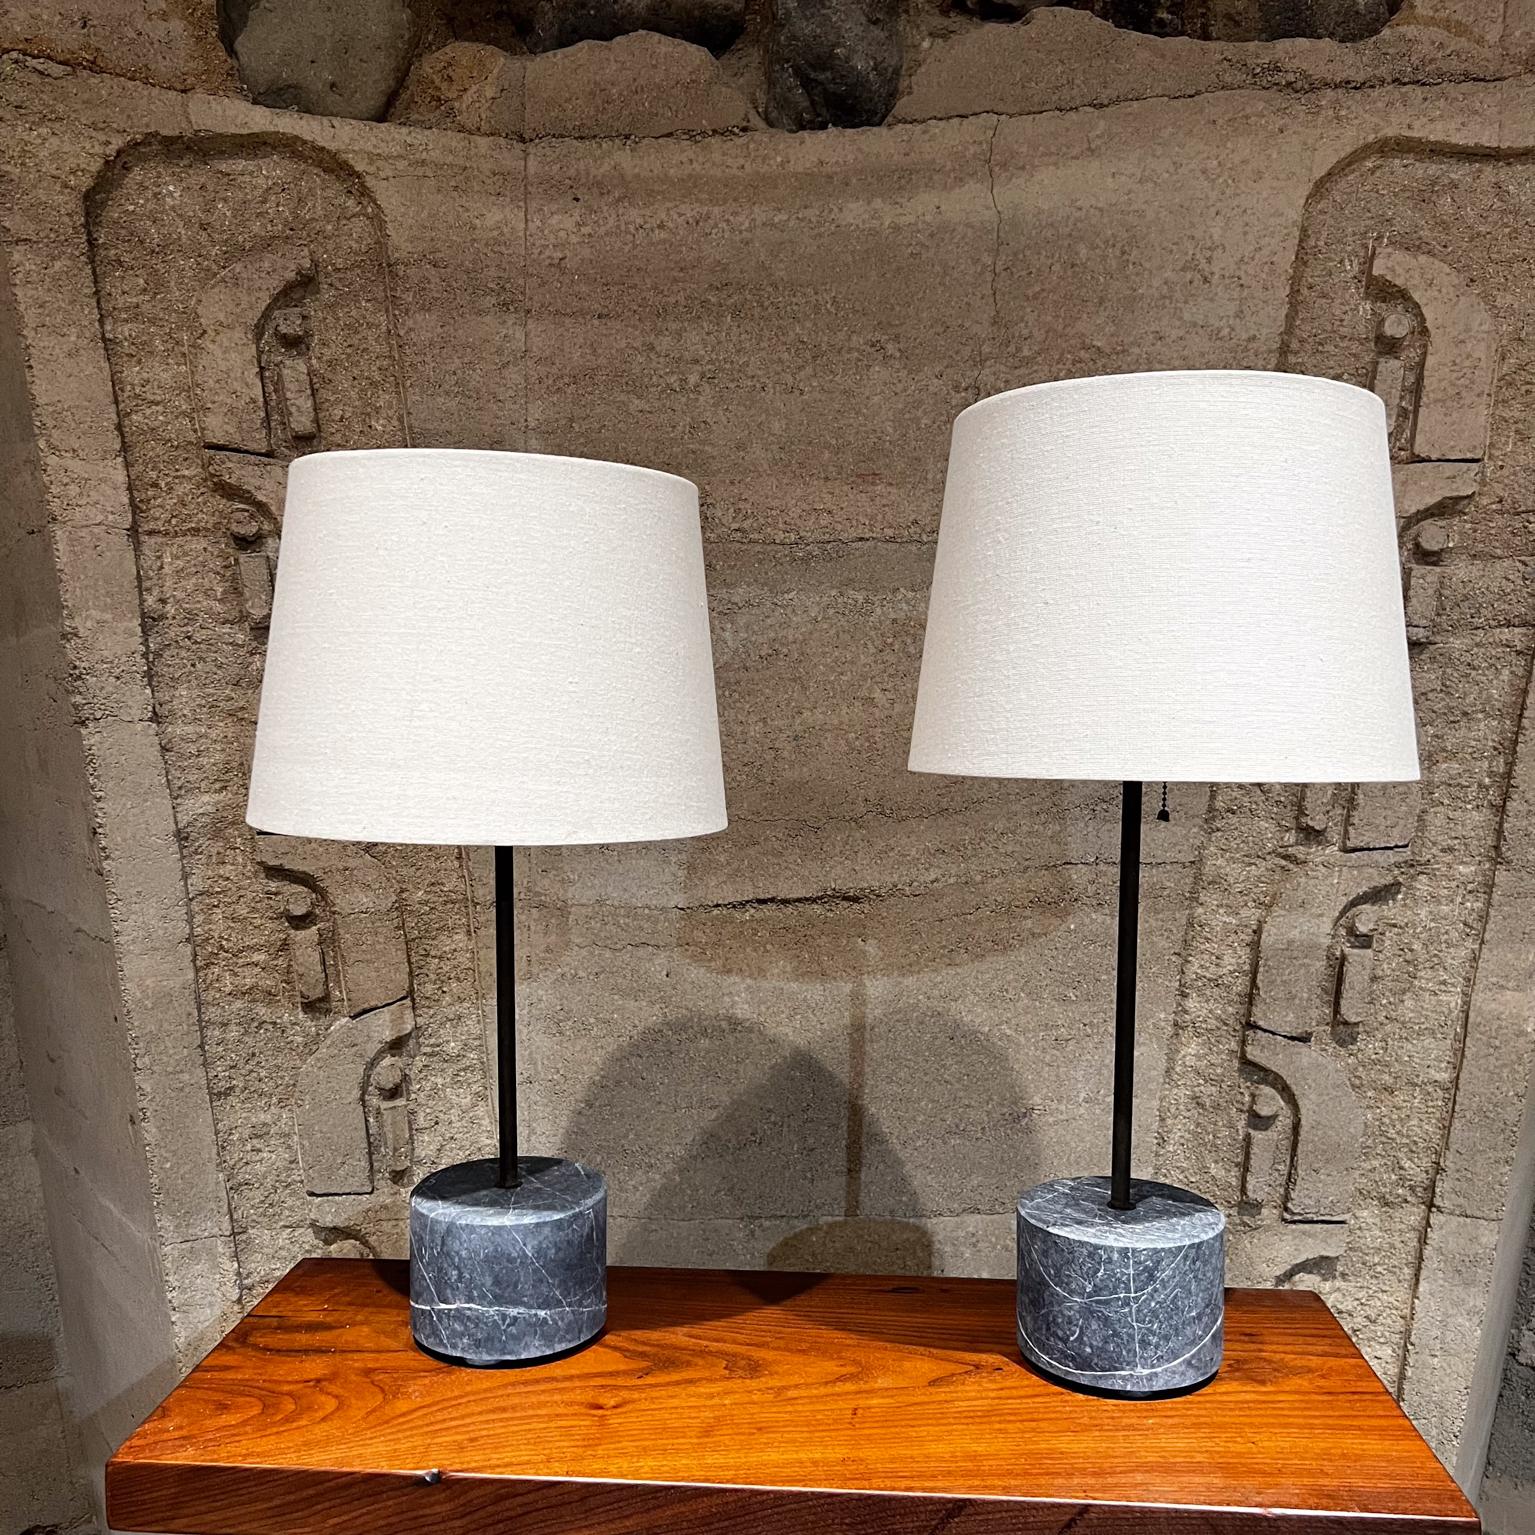 Contemporary Modern Raw Marble Table Lamps by Pablo Romo
Gray marble acid finish
18.75 h x 6.5 diameter
Original condition.
New wiring tested and working.
New limited production 1-1
No shades are included.
Review all images.